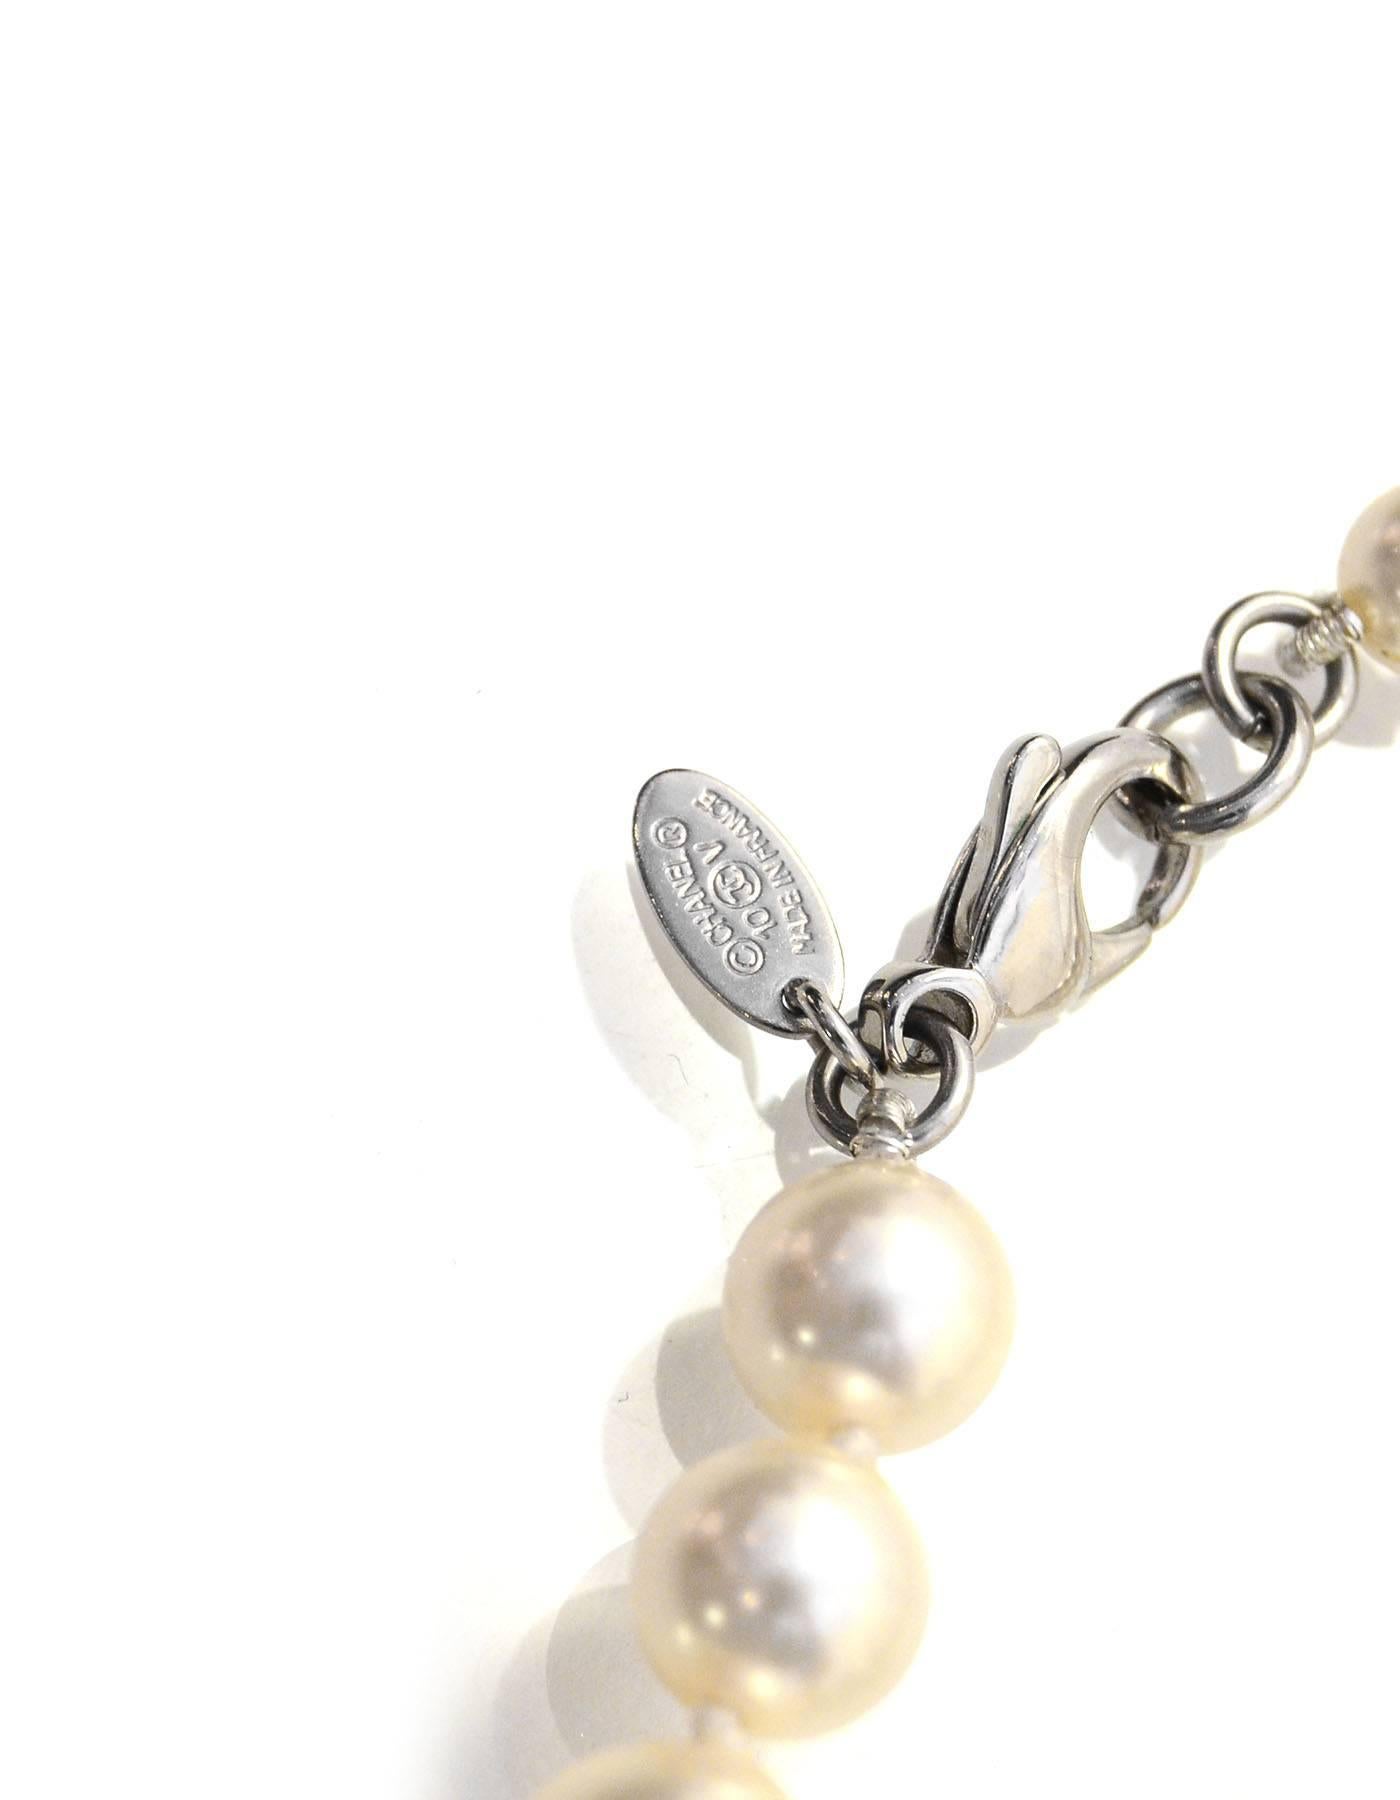 100% Authentic Chanel Graduated Pearl & Beaded CC Necklace

Made In: France
Year of Production: 2010
Color: Ivory and silvertone
Materials: Metal, faux pearl and beads
Closure: Lobster claw clasp
Stamp: 10 CC V
Overall Condition: Excellent pre-owned